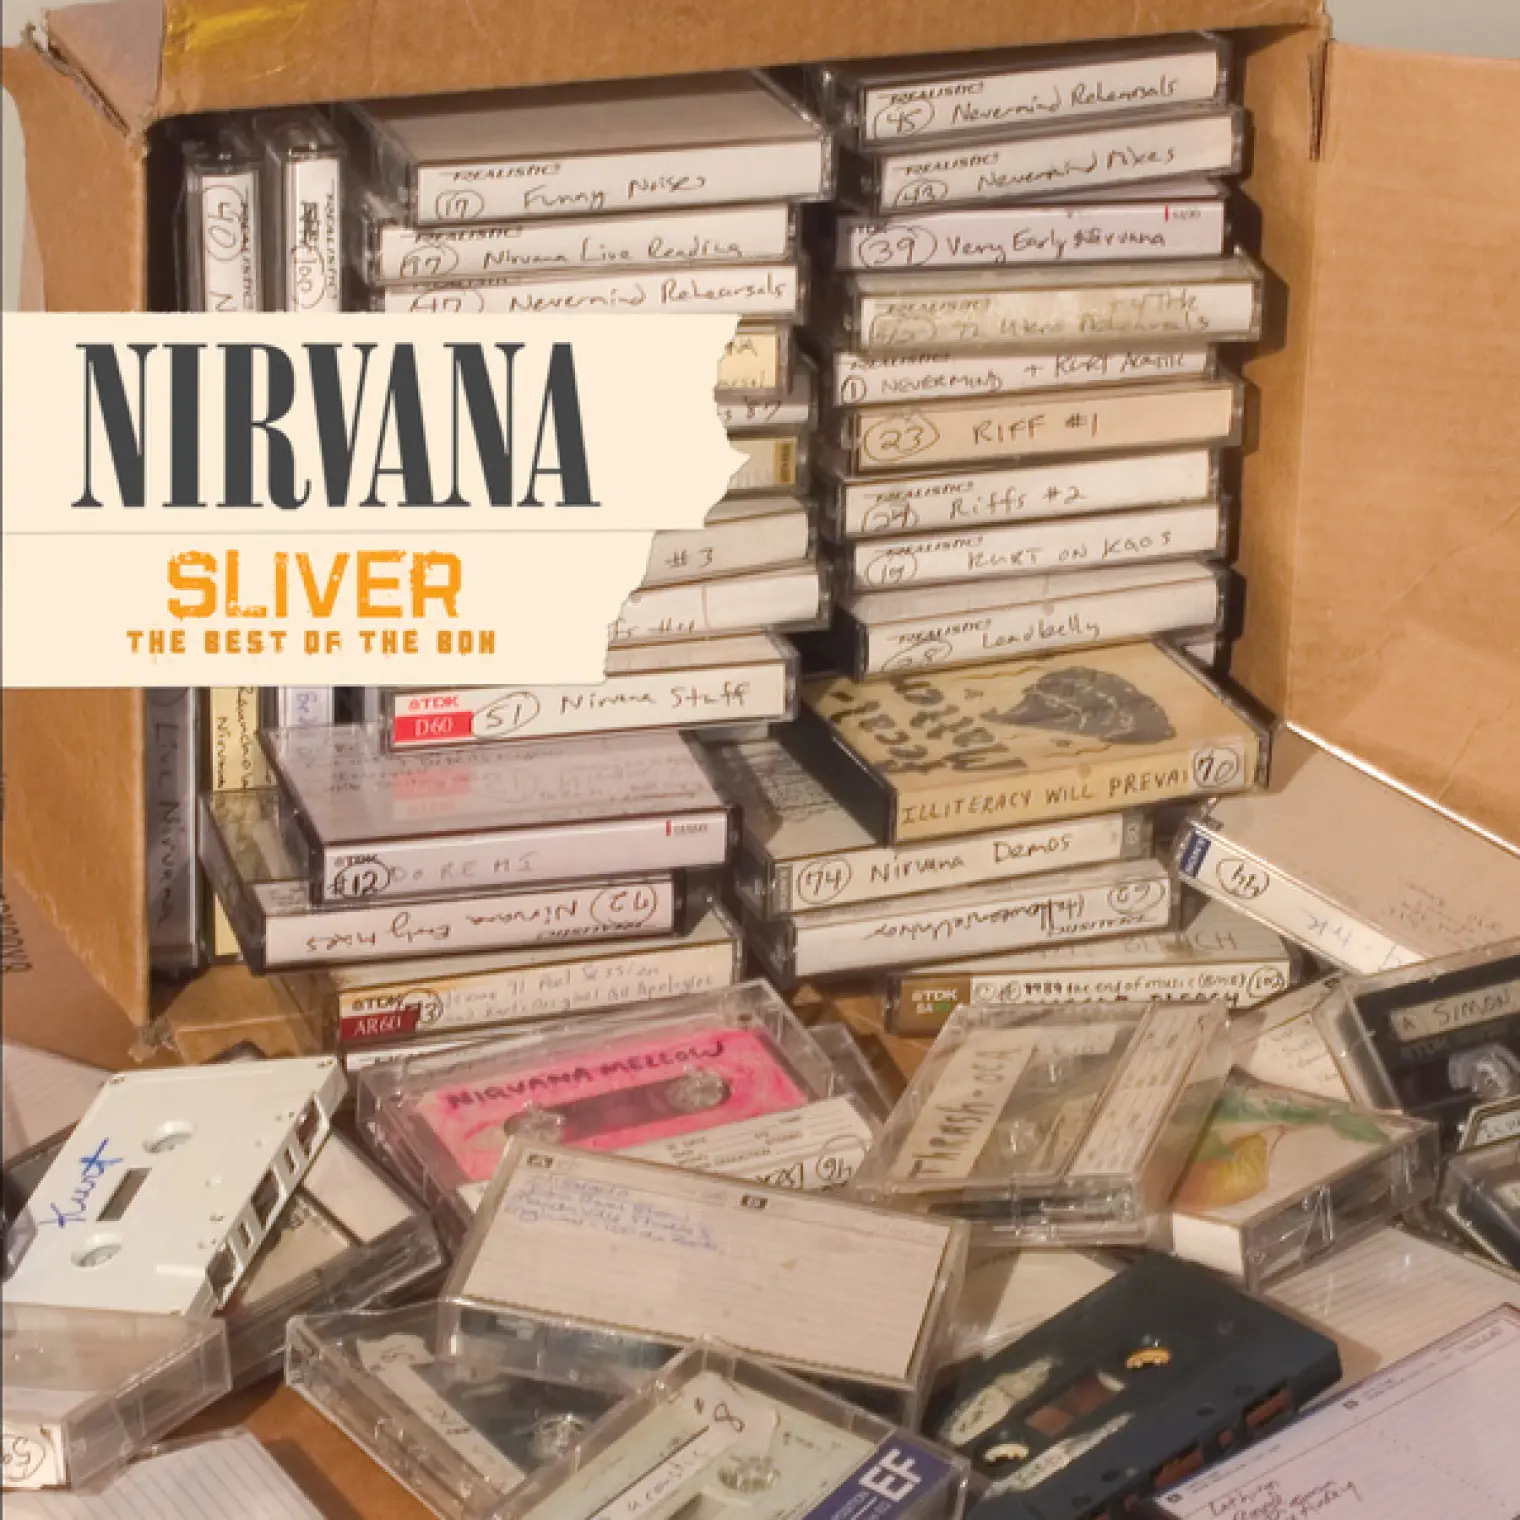 Sliver - The Best Of The Box -  Nirvana 